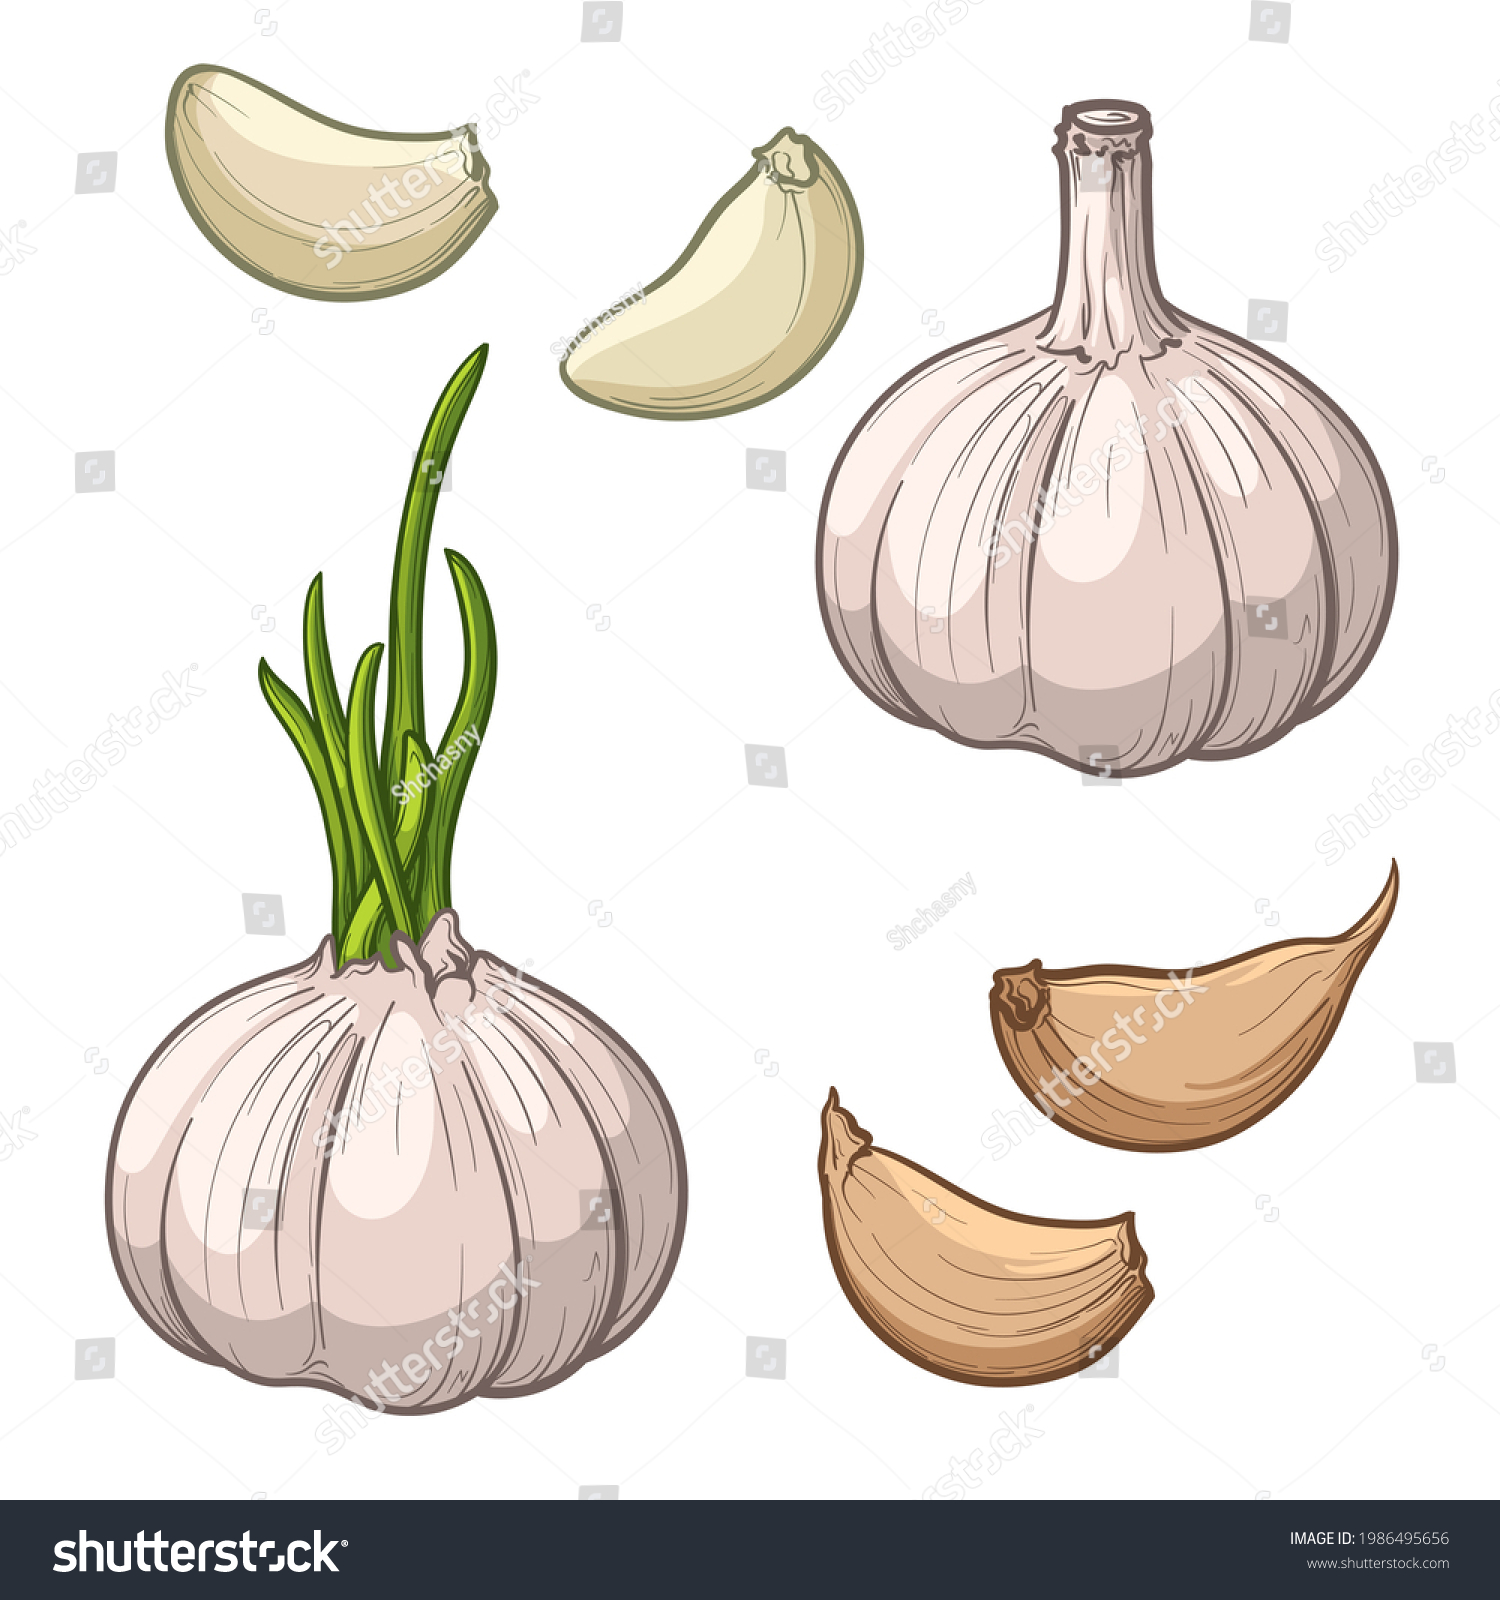 Garlic isolated on a white background. Garlic head and clove. Set of garlic. Hand drawn vector illustration. #1986495656